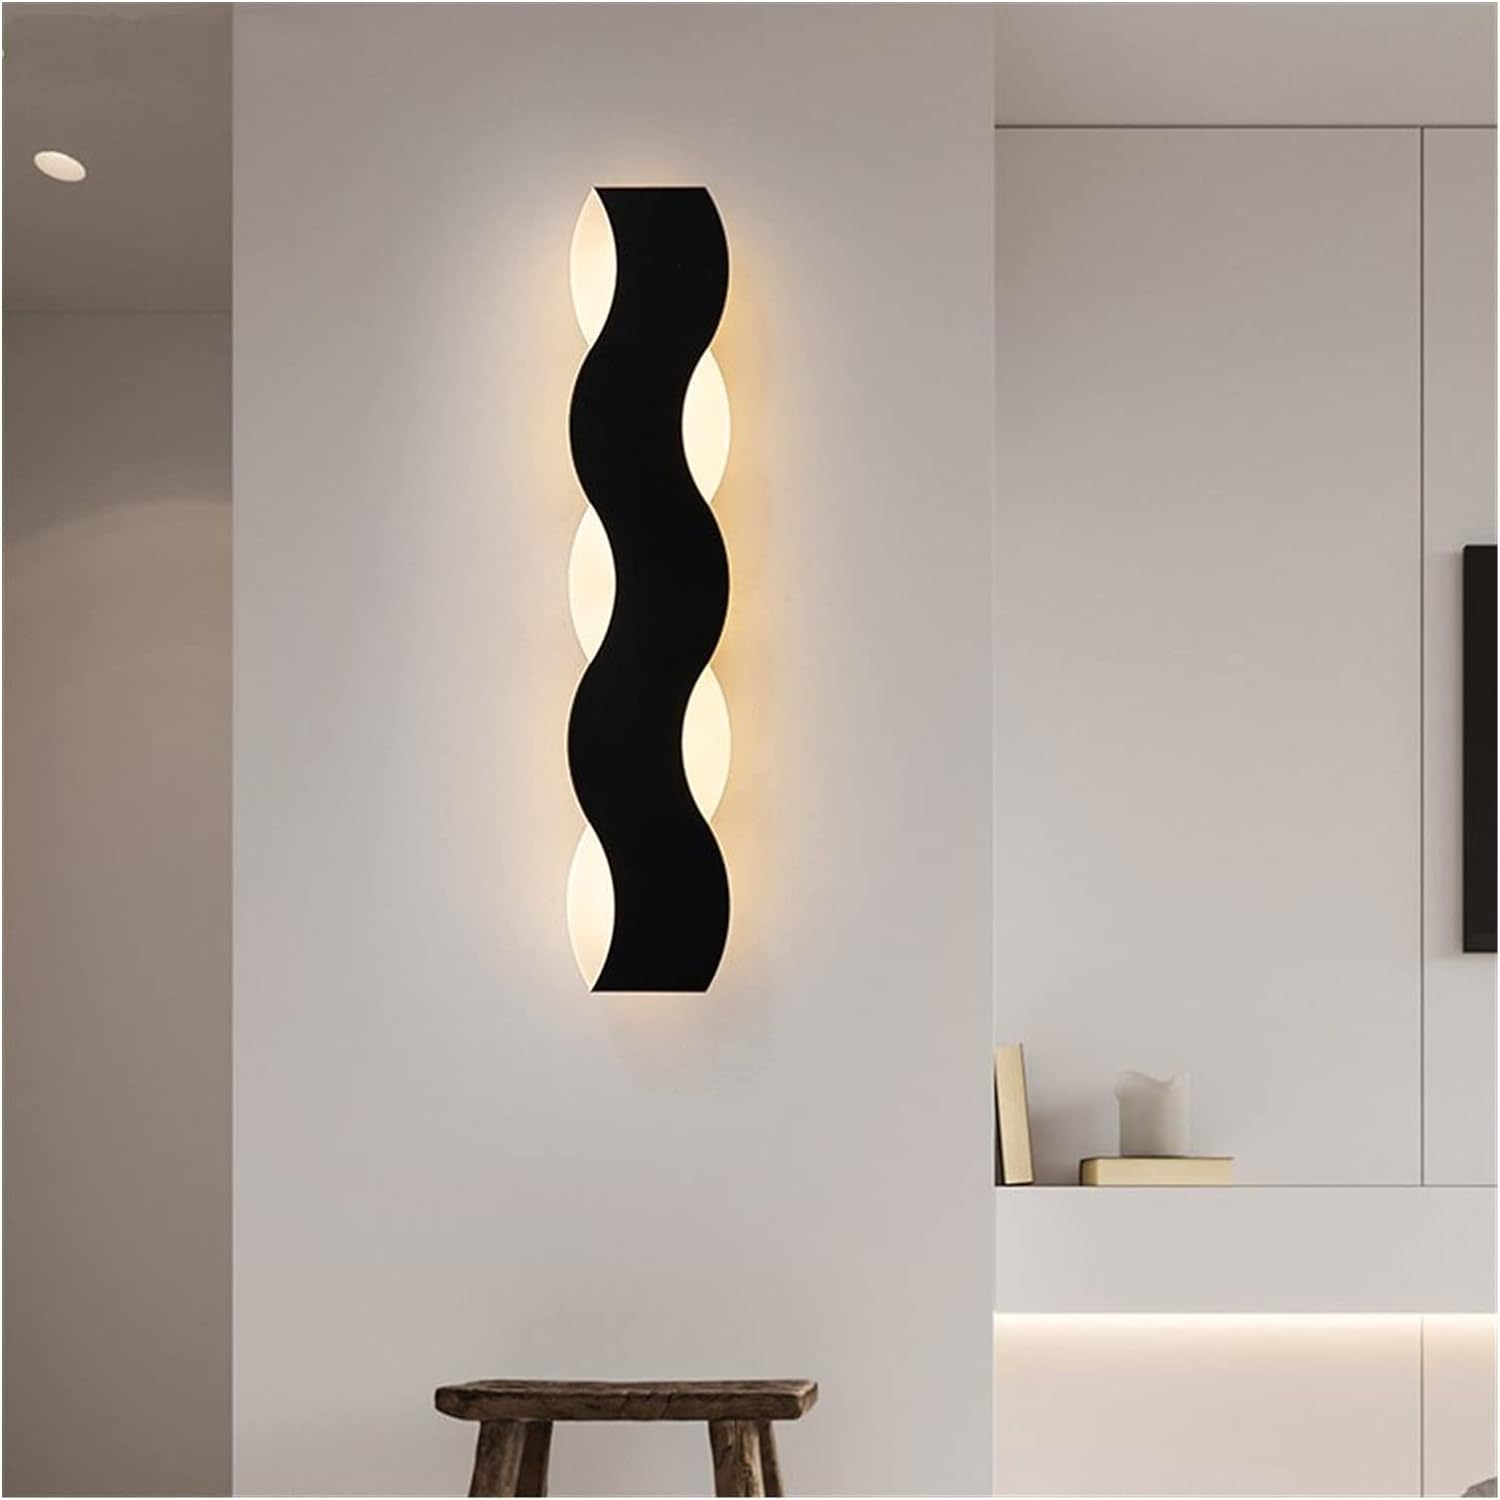 Bali Wave Outdoor Linear Wall Light - Future Light - LED Lights South Africa